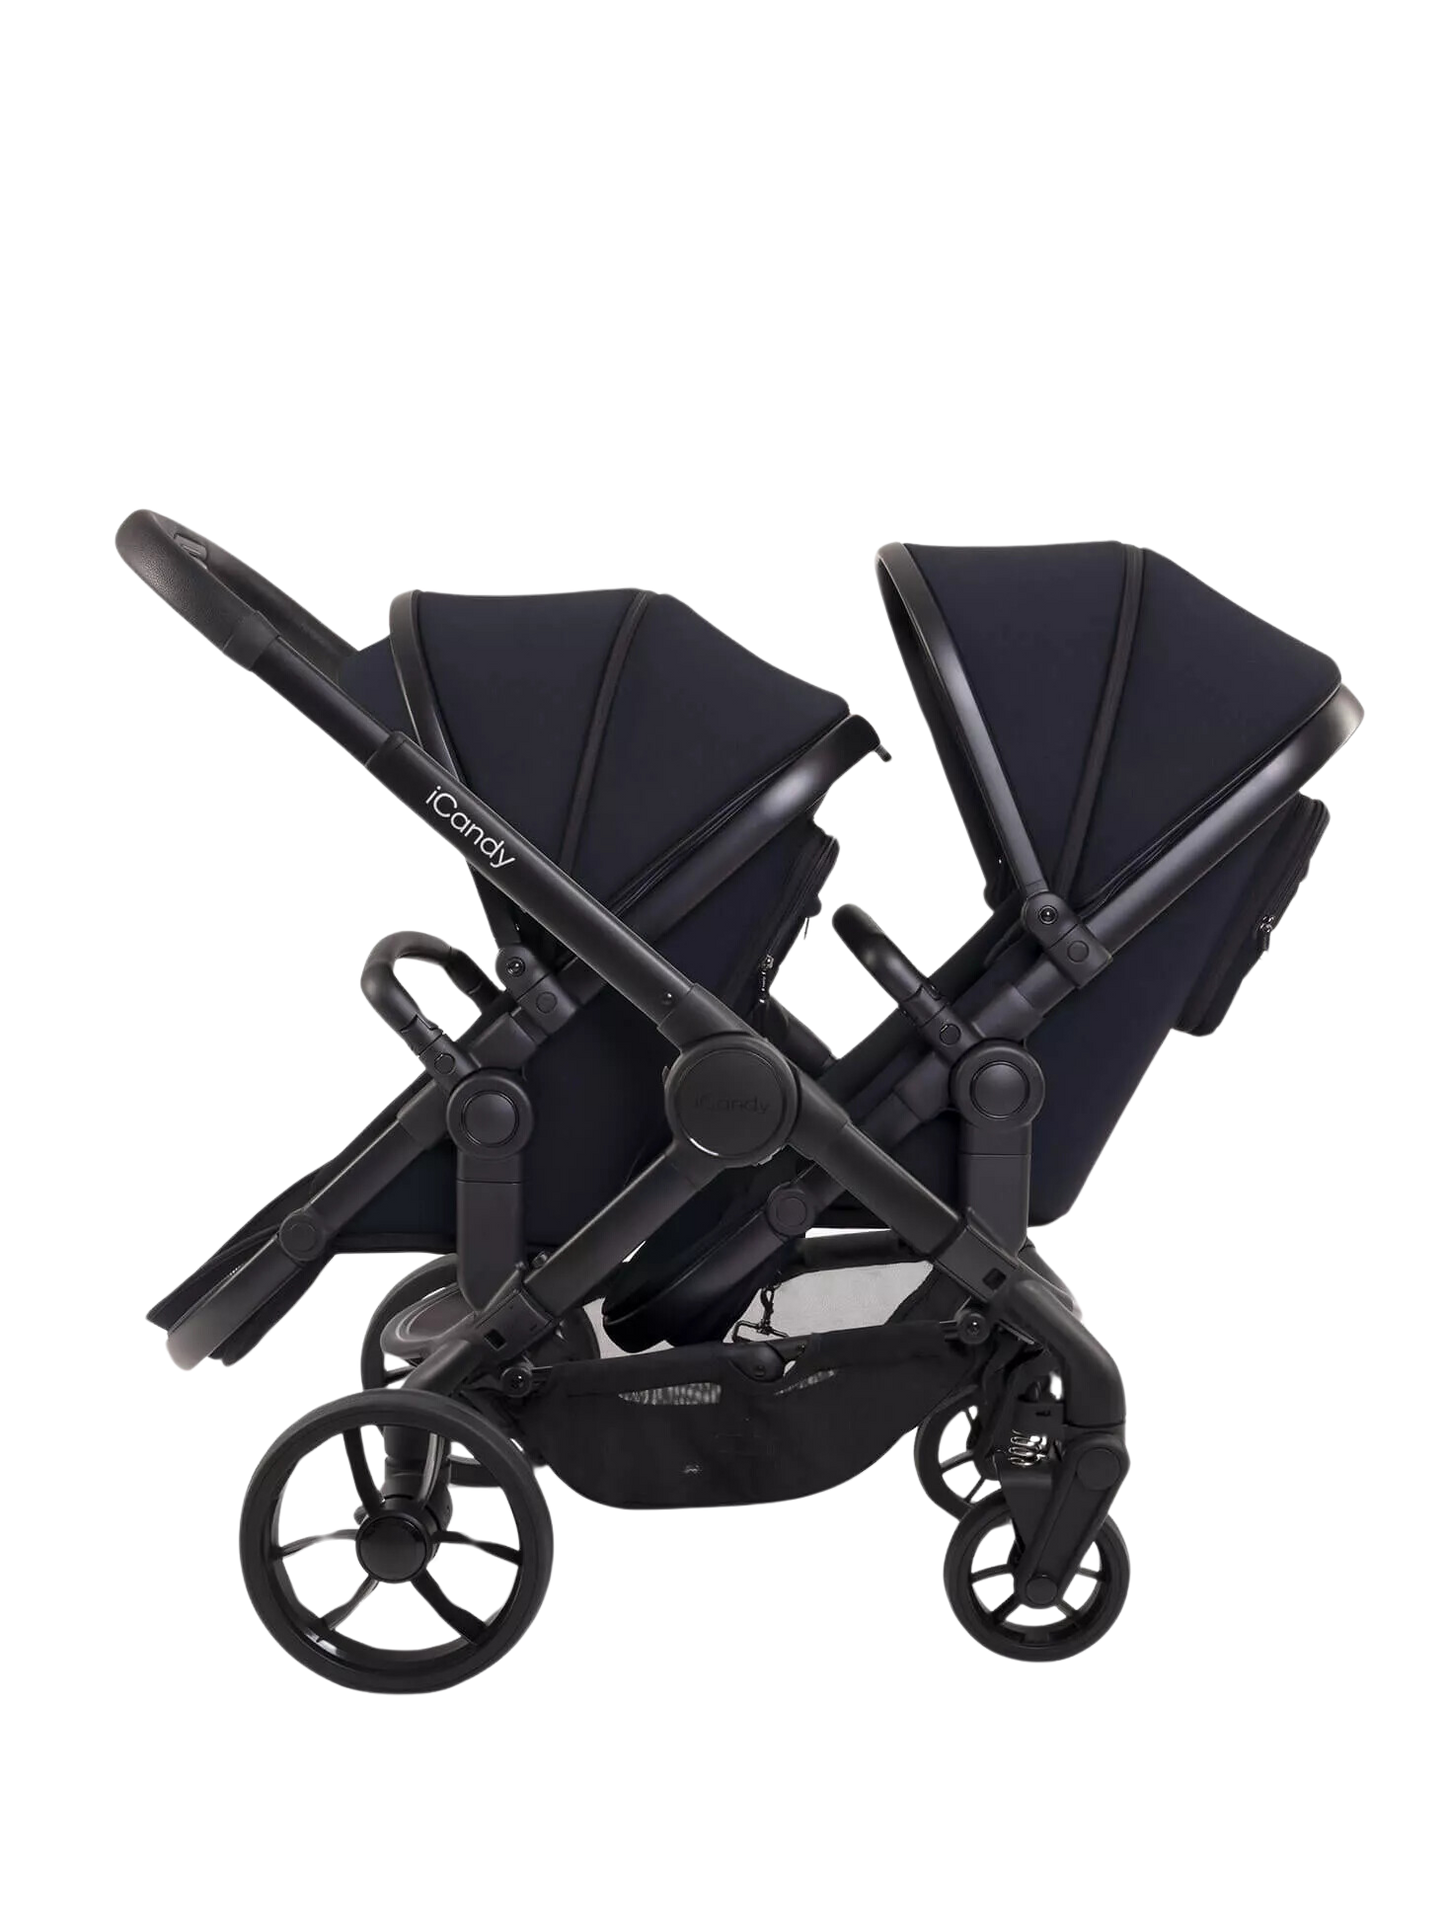 iCandy Peach 7 Twin Stroller and Bassinet - Black